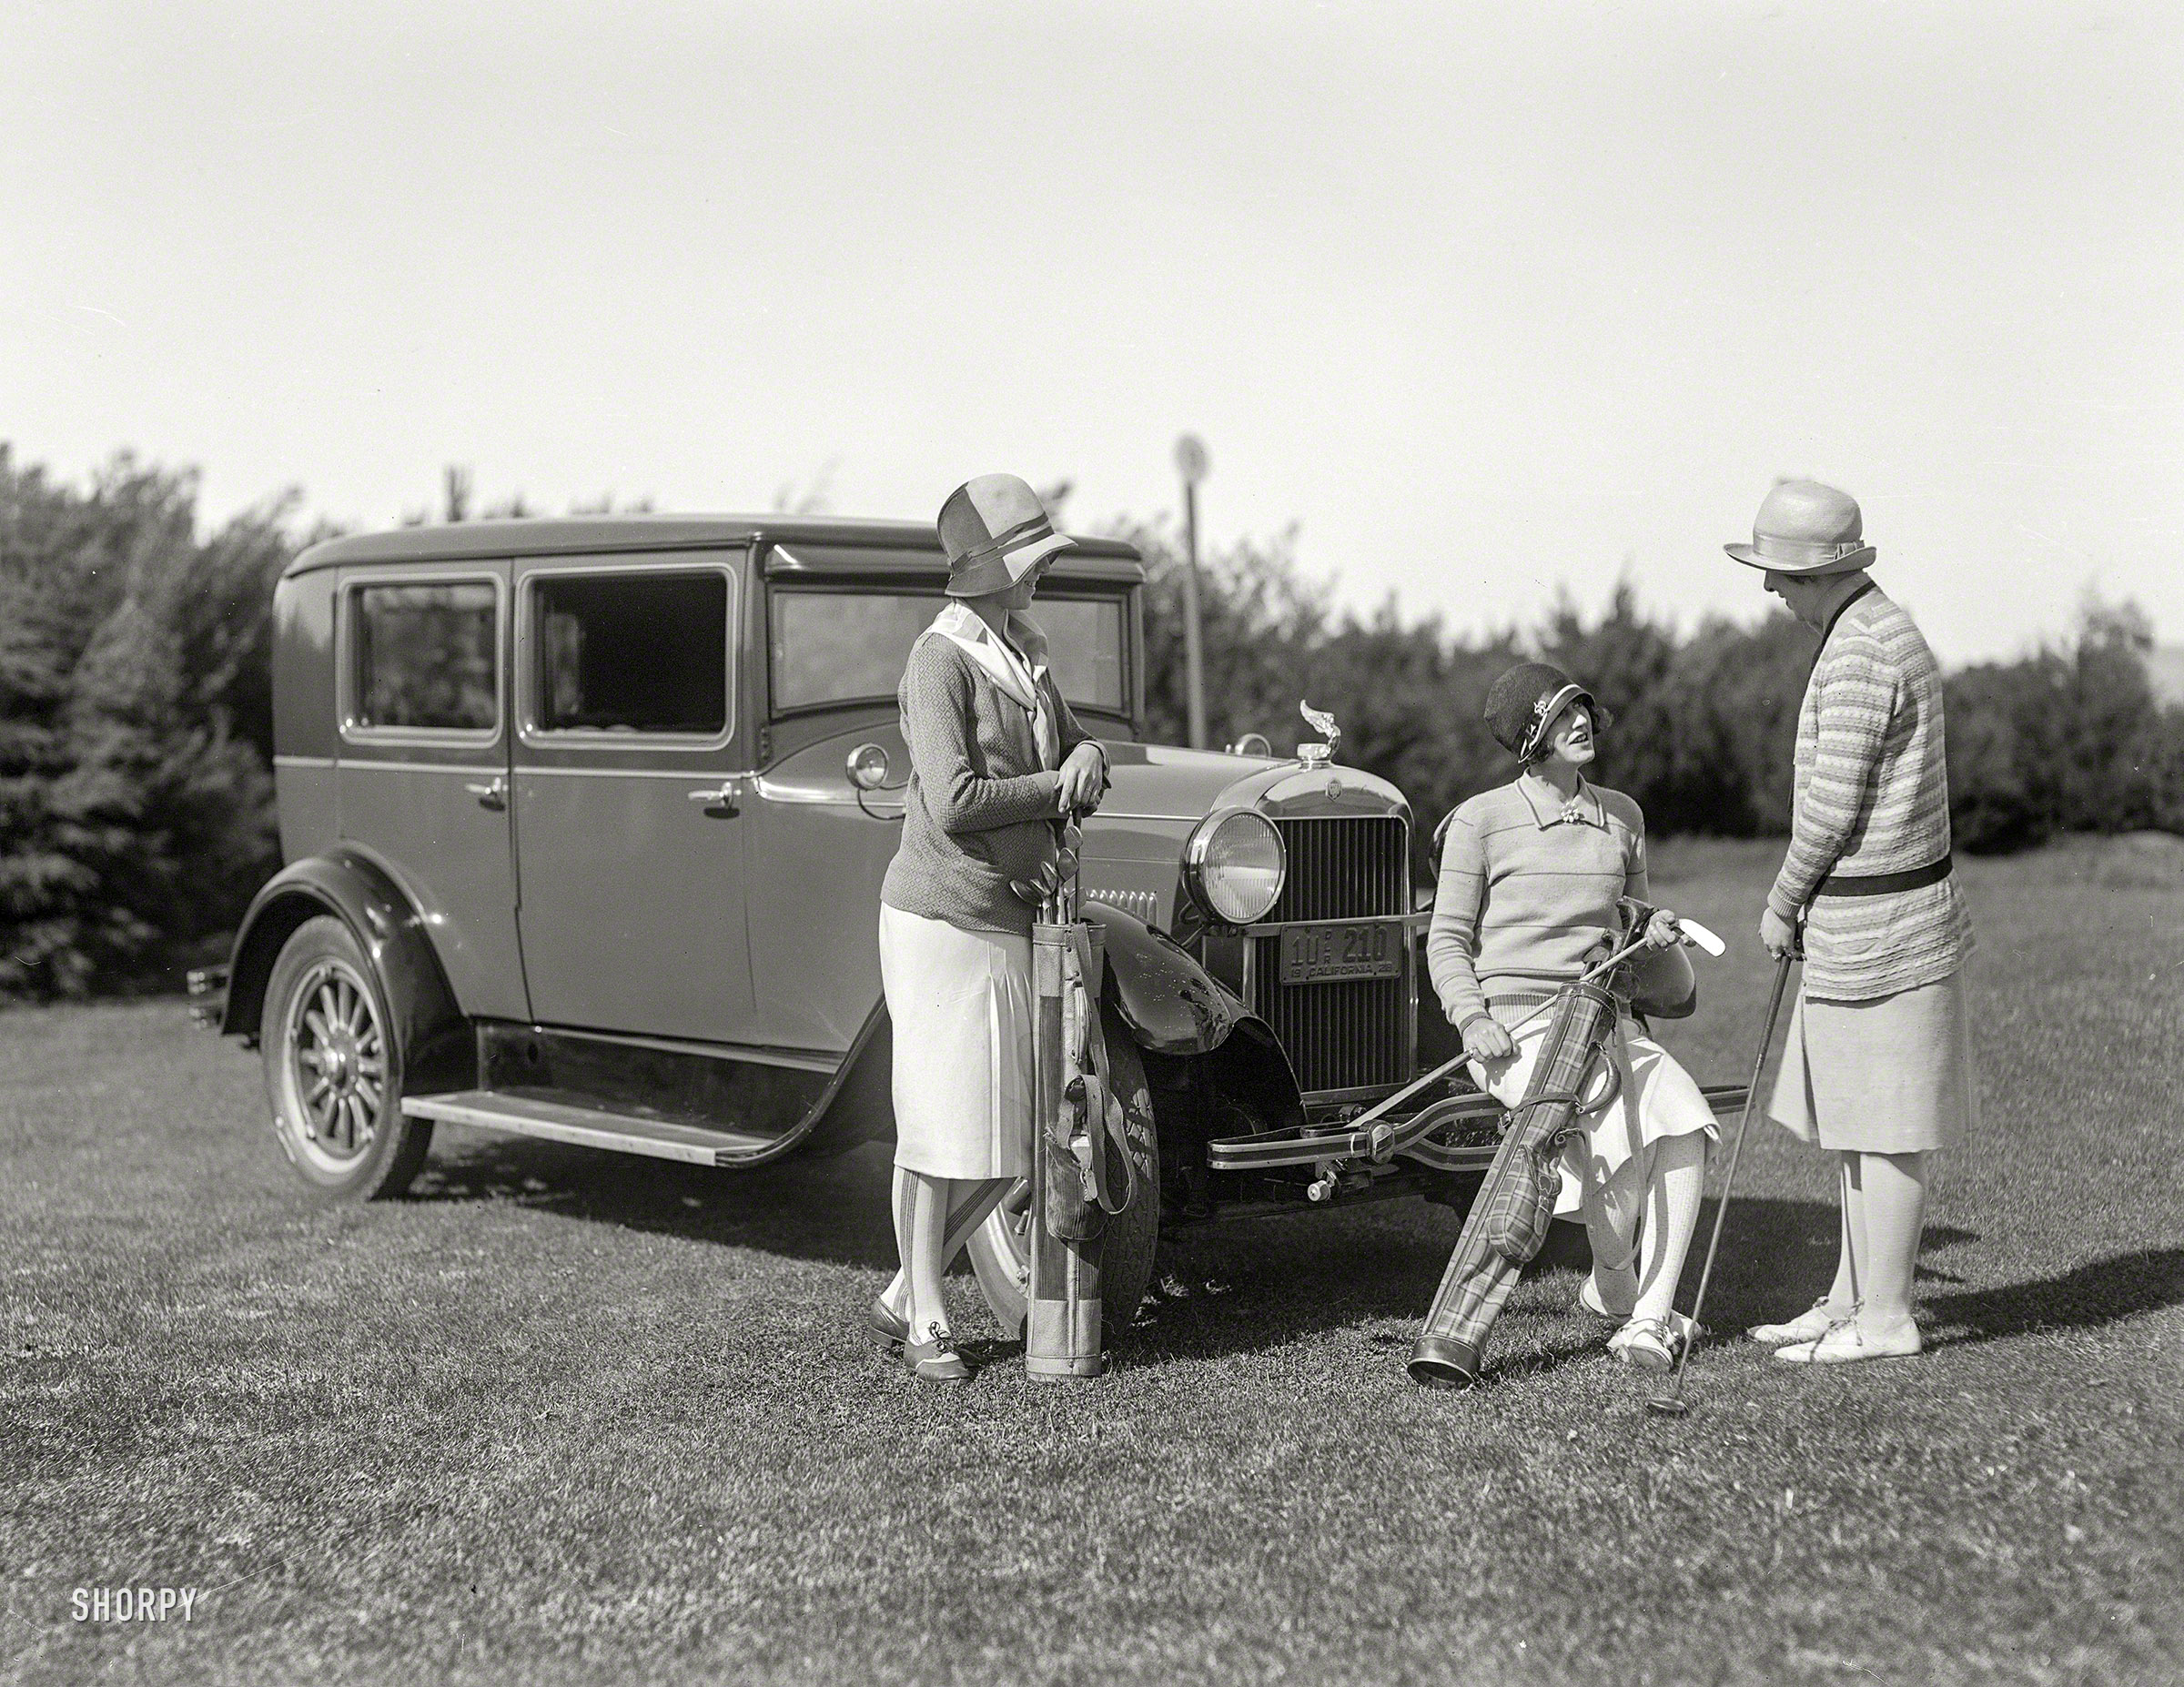 San Francisco, 1928. "Essex Super Six sedan at golf course." Topping the Shorpy Leaderboard of Fairway Phaetons. Glass negative by Chris Helin. View full size.